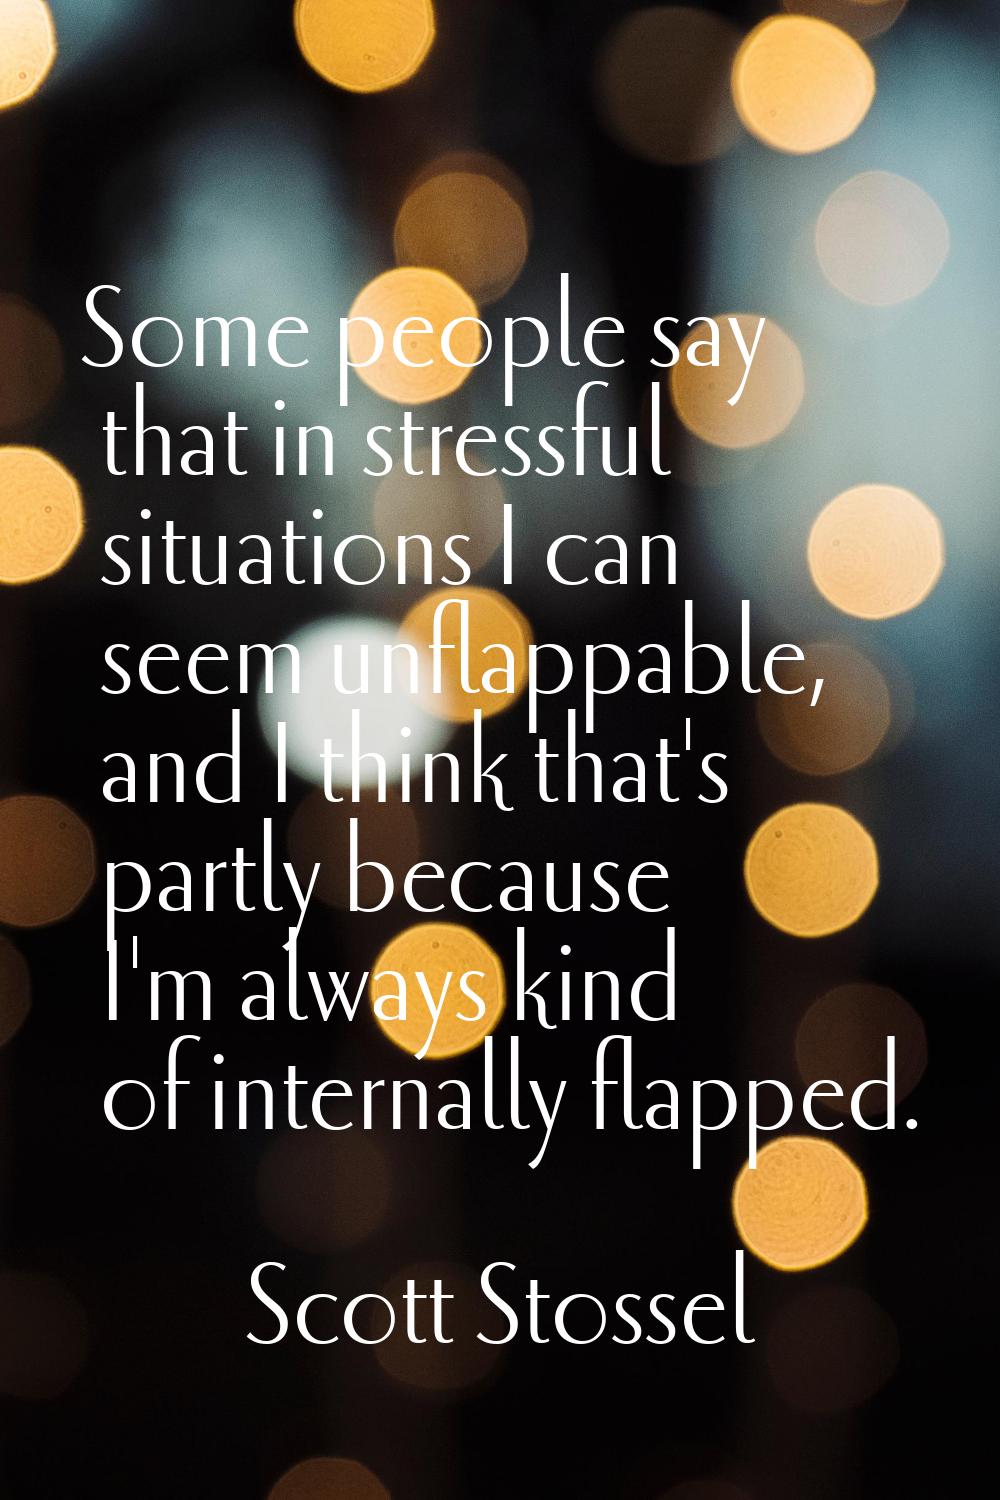 Some people say that in stressful situations I can seem unflappable, and I think that's partly beca